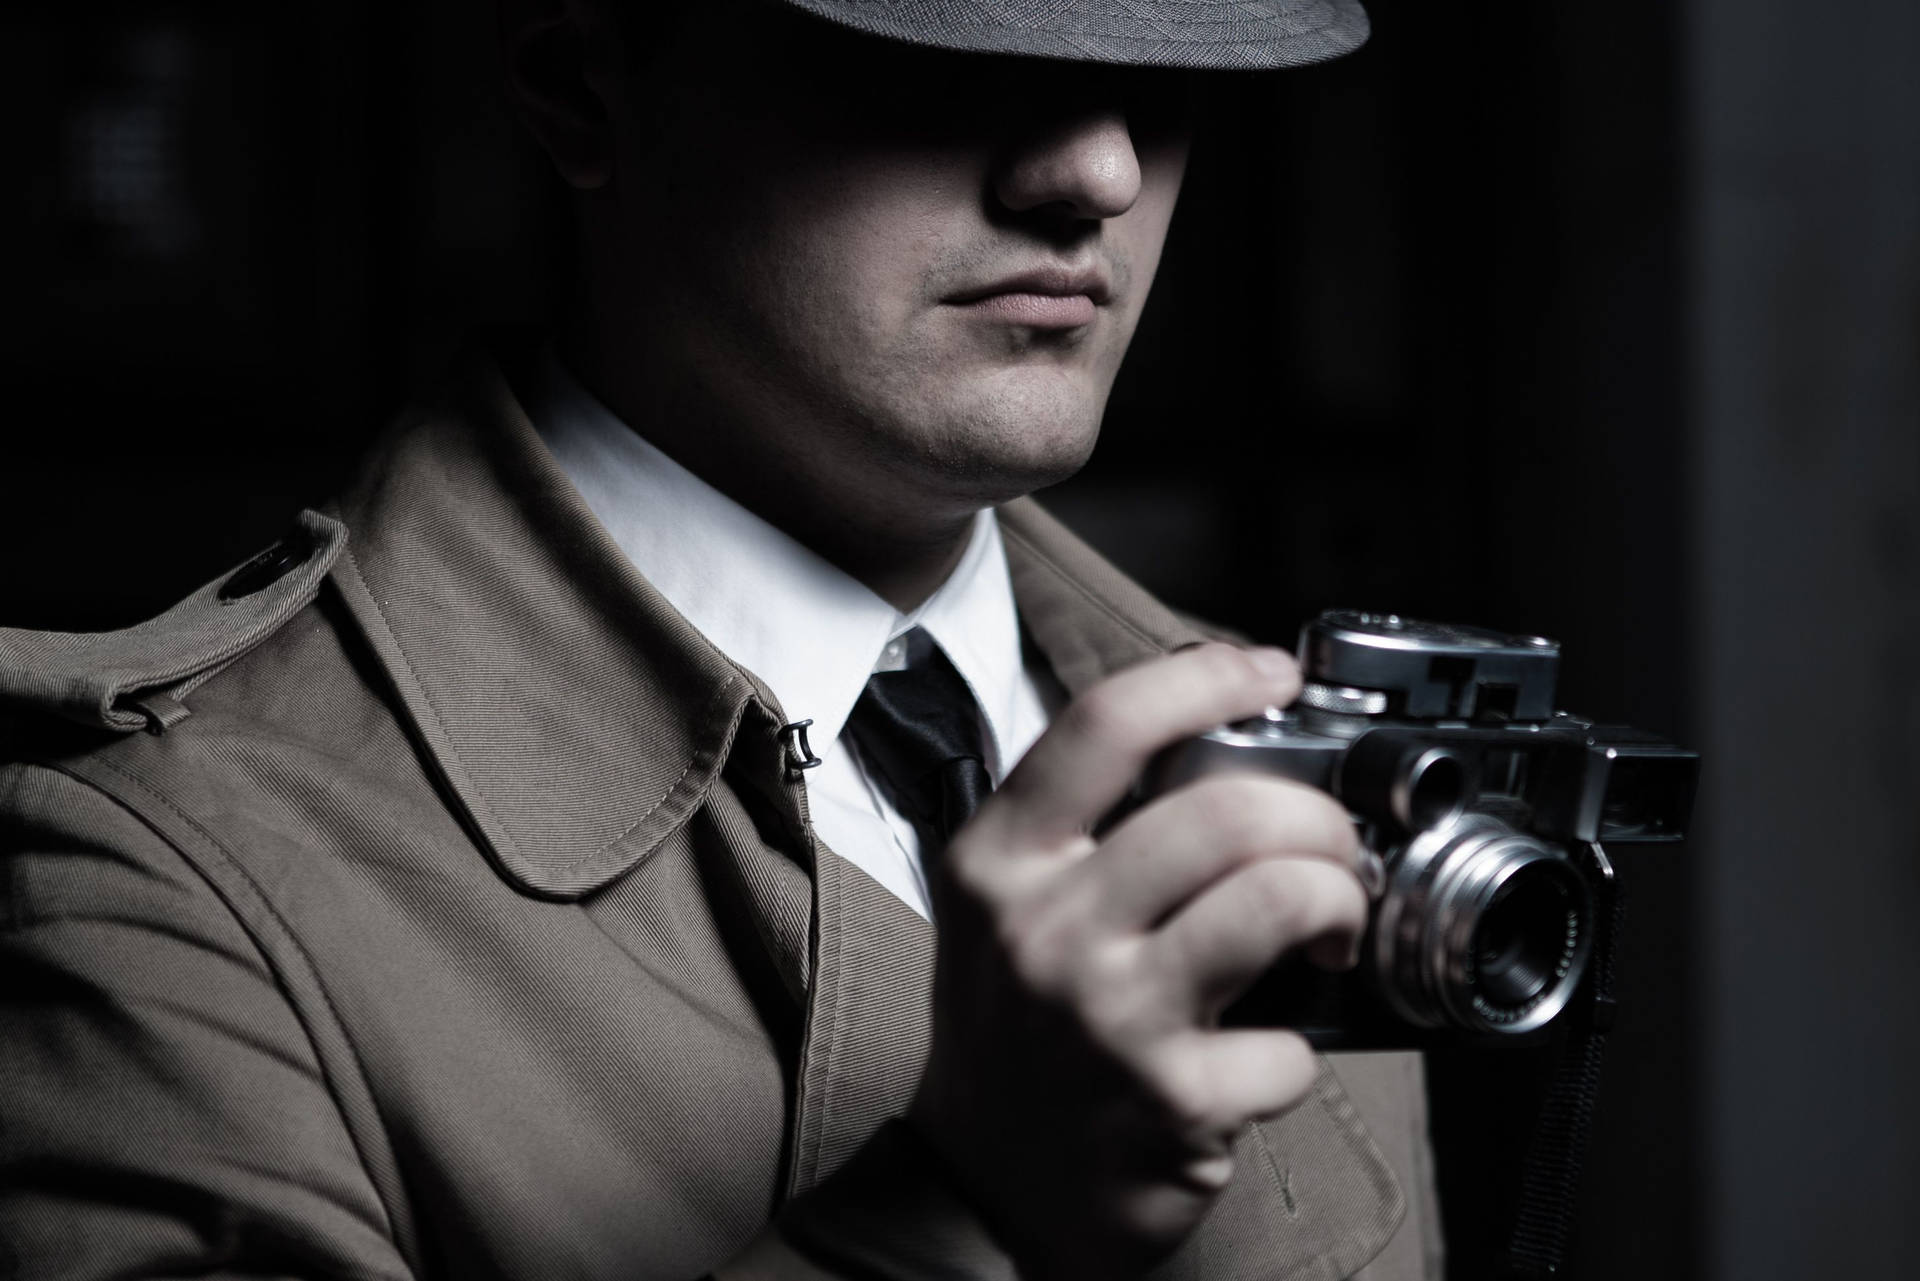 A Skilled Private Detective Capturing Evidence Using A Professional Camera Background